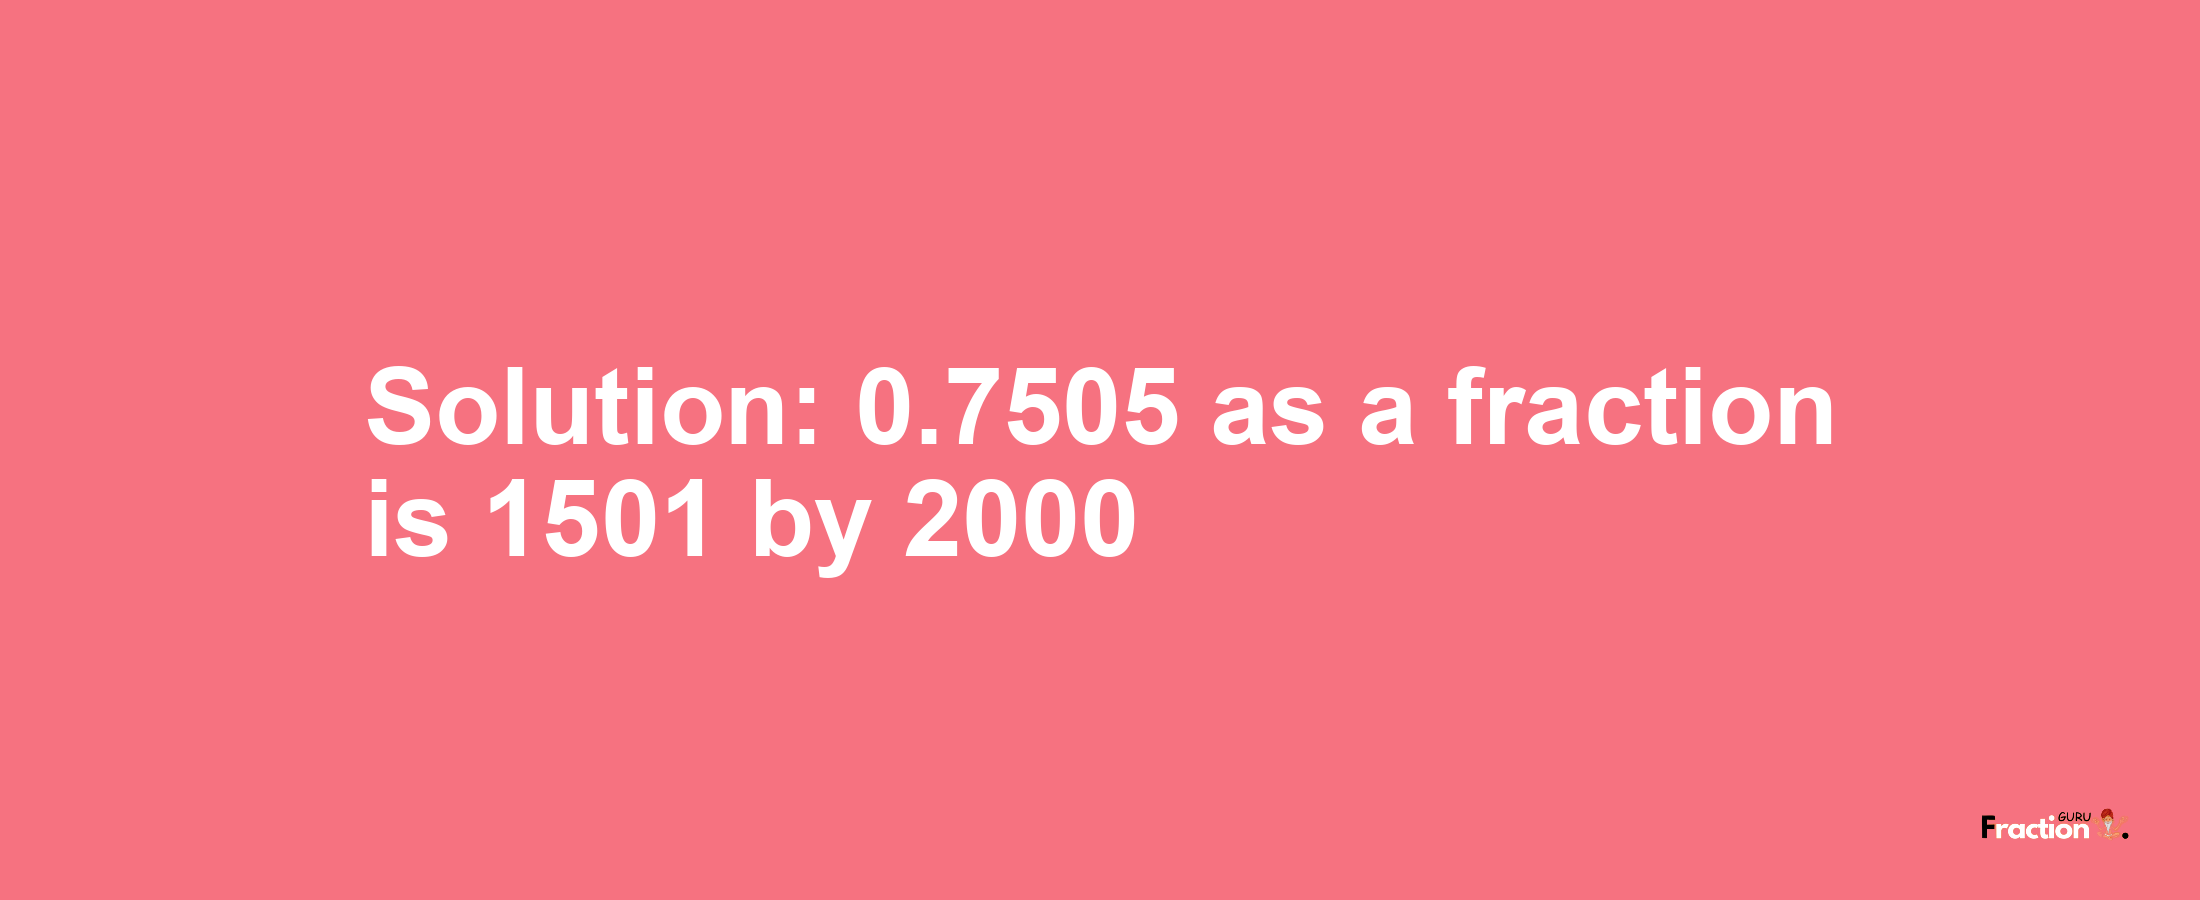 Solution:0.7505 as a fraction is 1501/2000